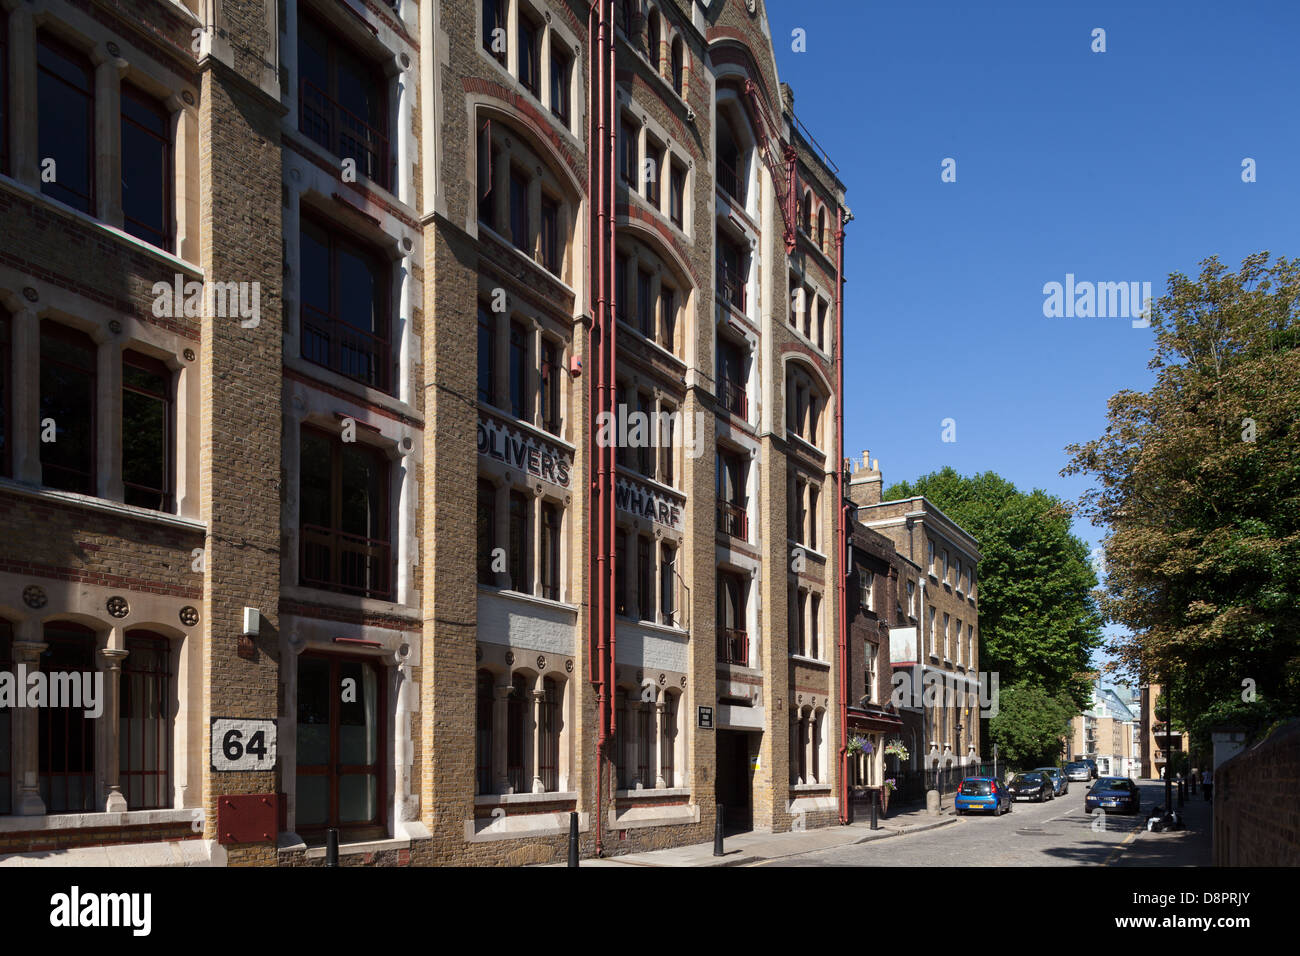 Oliver's Wharf, Wapping High Street, London Stock Photo